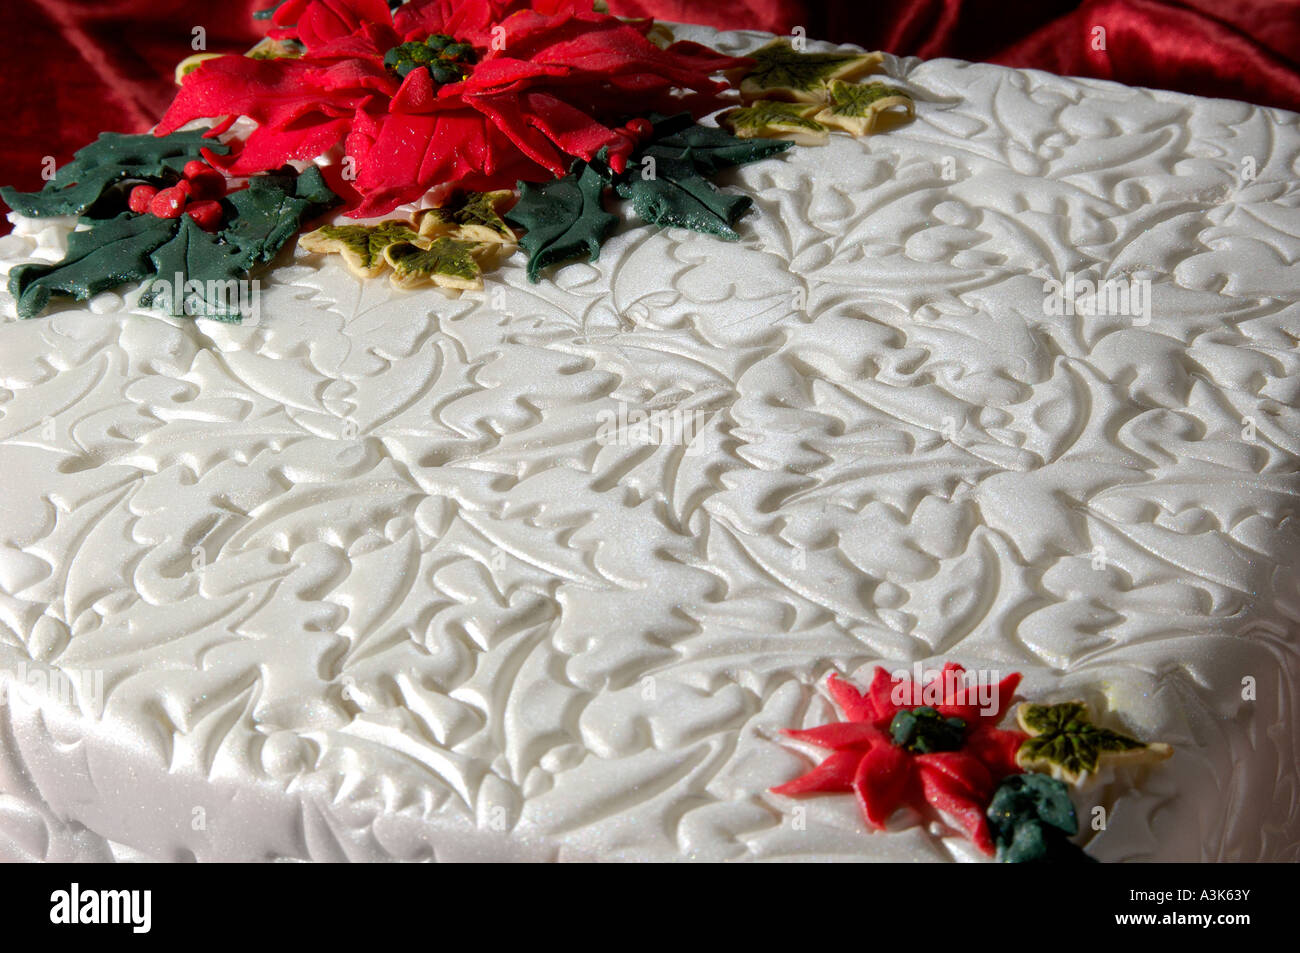 Beautifully decorated iced Christmas fruit cake with embossed holly leaves and red poinsettia flowers made from icing Stock Photo